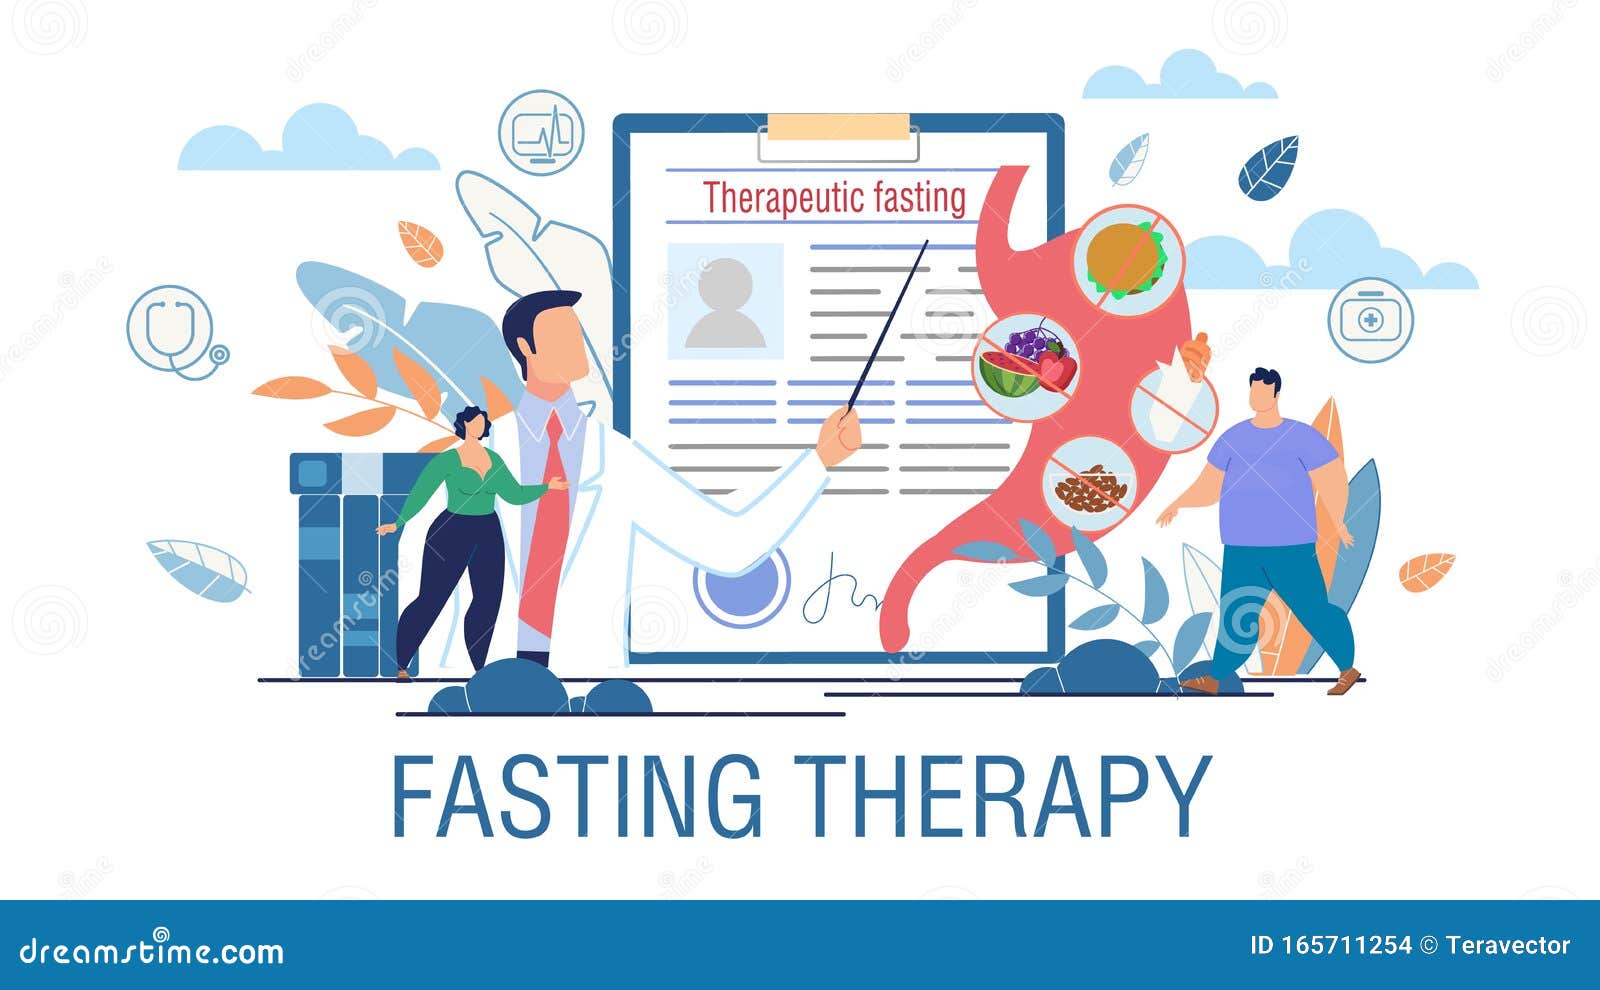 fasting therapy obesity treatment promotion poster